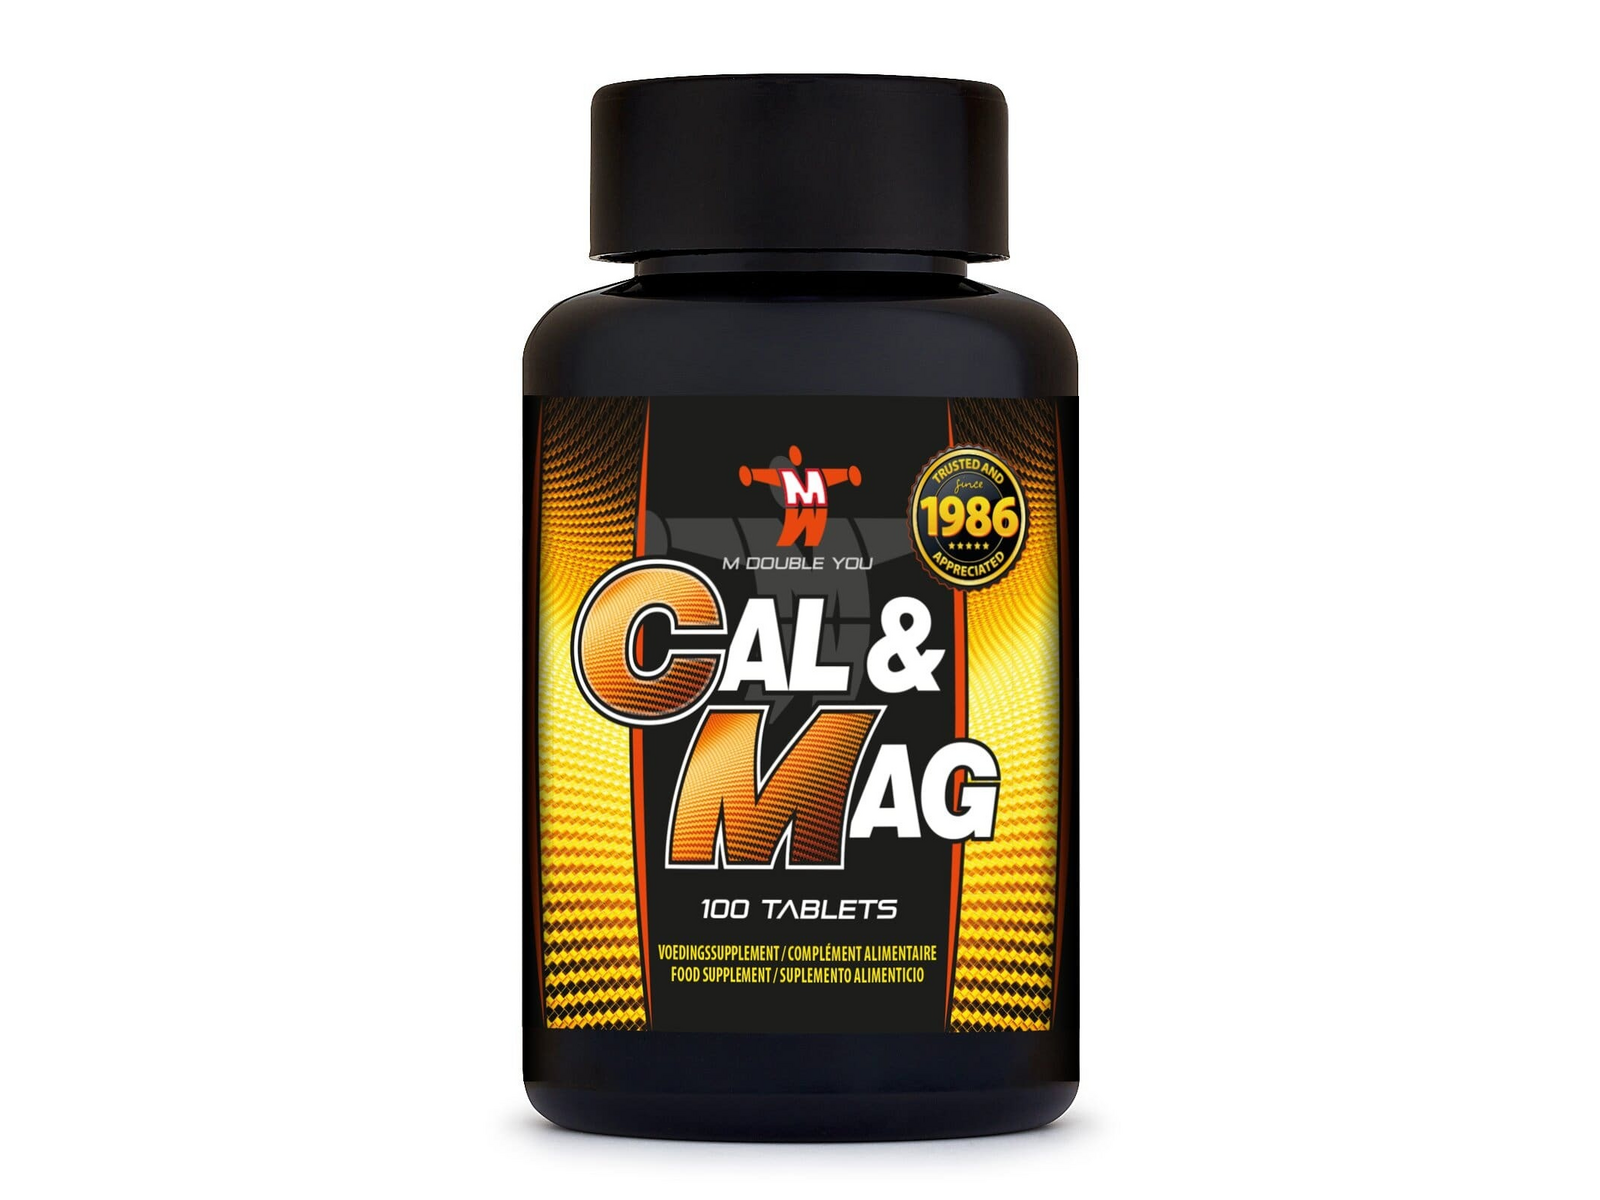 Cal & Mag (100 tablets) - M DOUBLE YOU